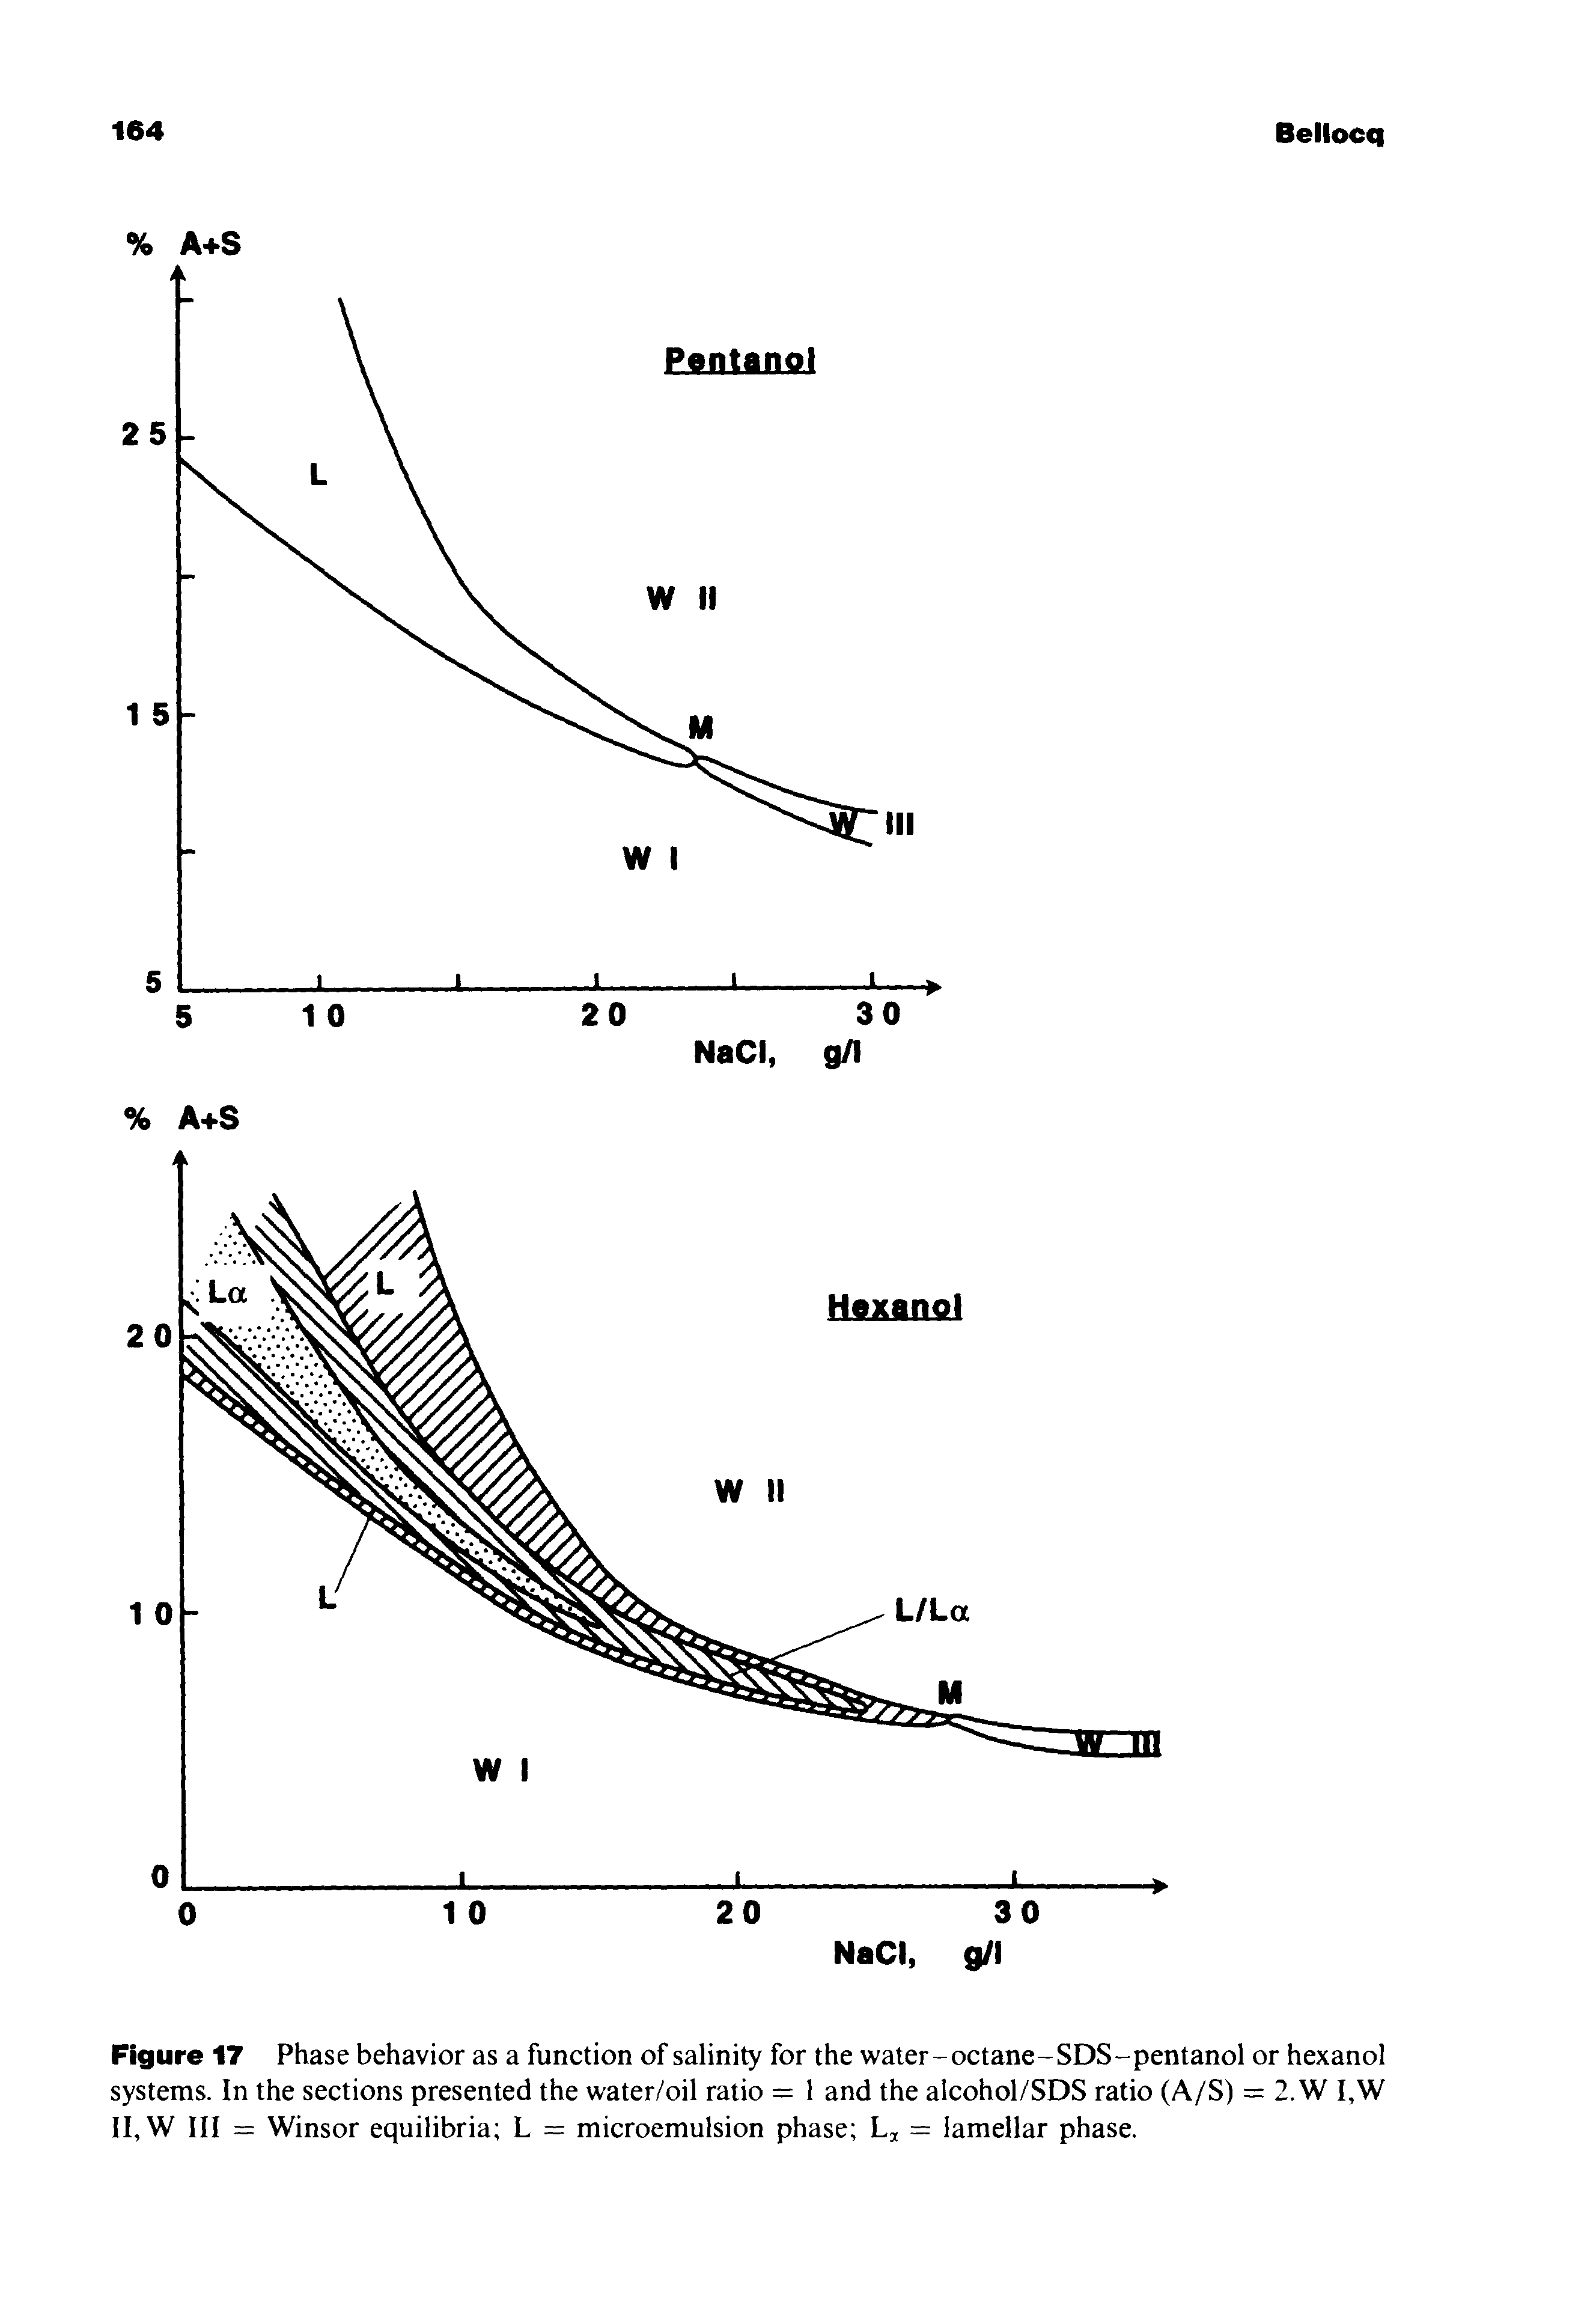 Figure 17 Phase behavior as a function of salinity for the water - octane-SDS-pentanol or hexanol systems. In the sections presented the water/oil ratio = 1 and the alcohol/SDS ratio (A/S) = 2.W I,W II, W III = Winsor equilibria L = microemulsion phase = lamellar phase.